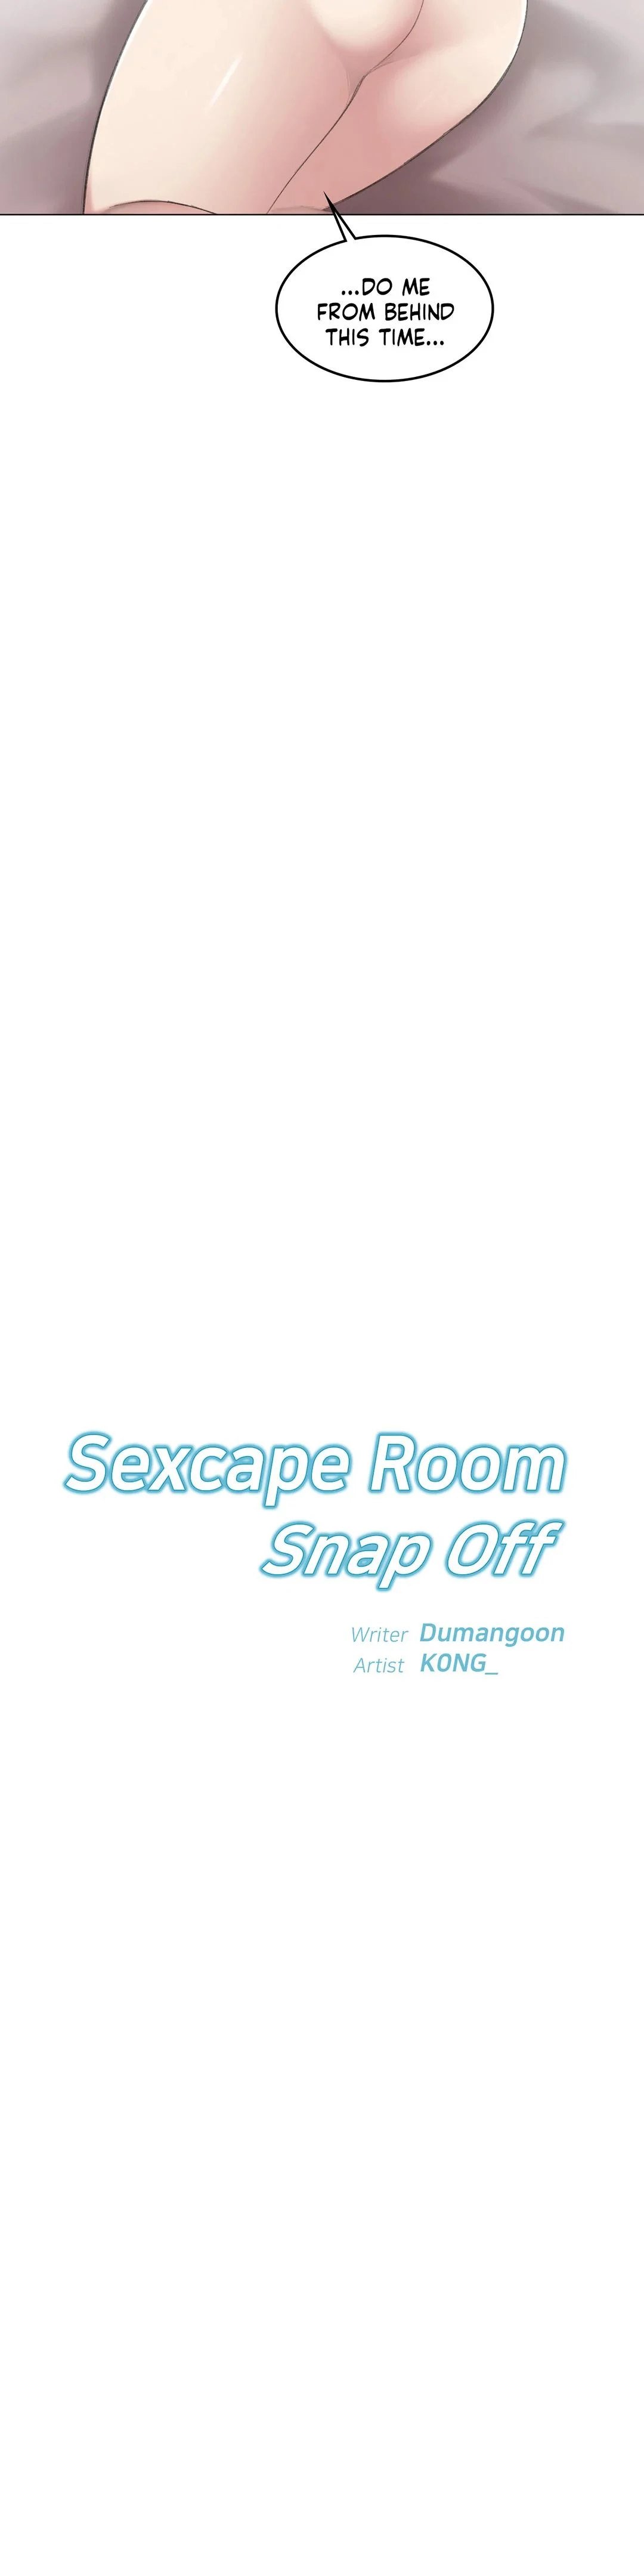 sexcape-room-snap-off-chap-7-4